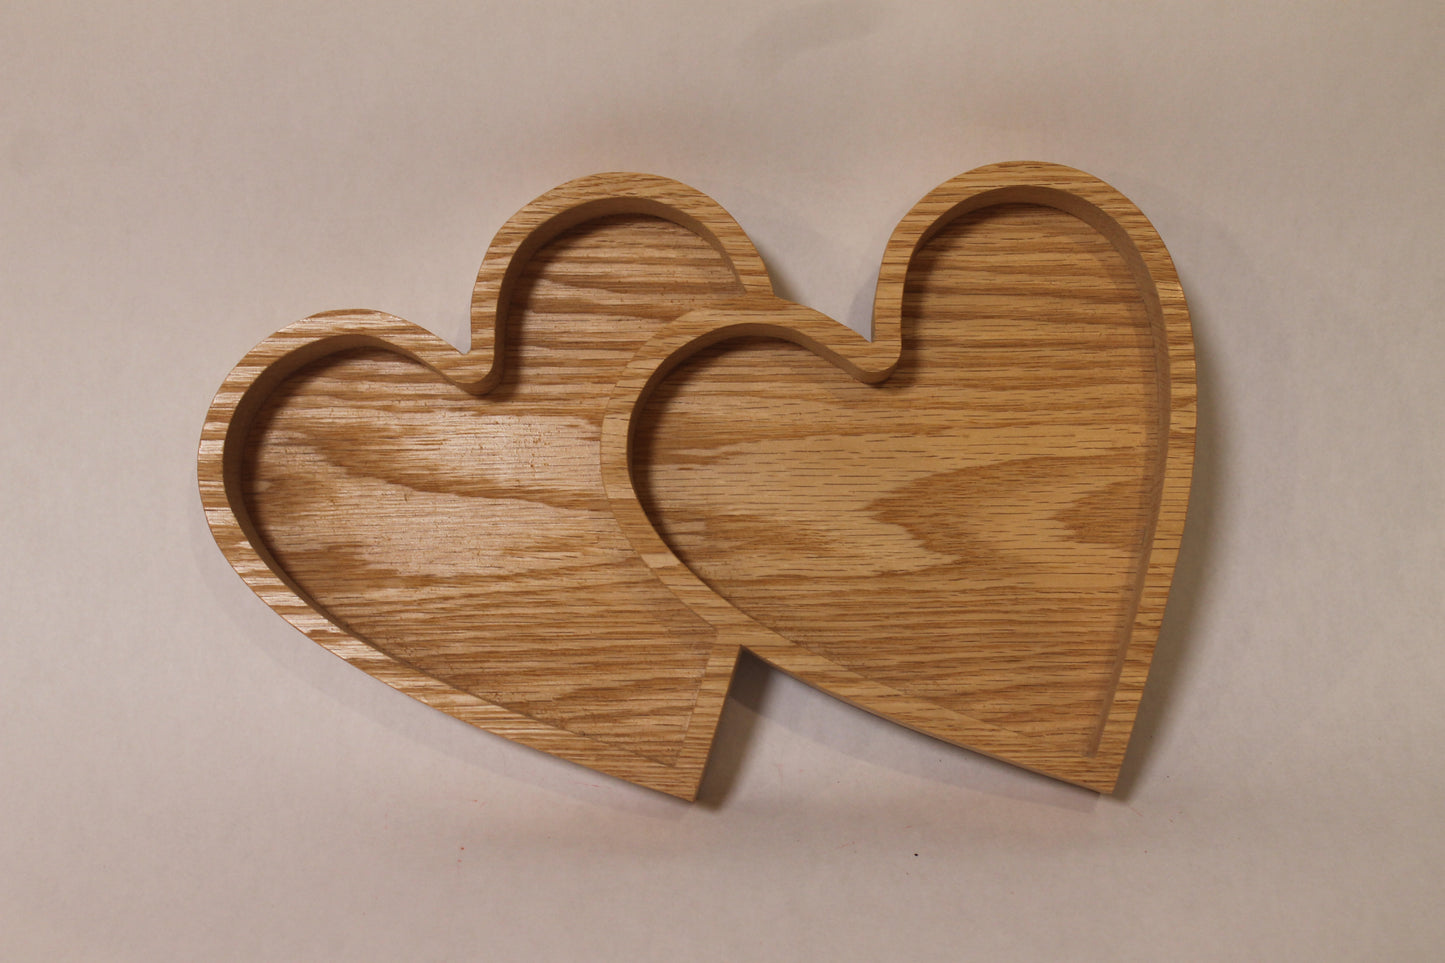 Double heart tray to use as a candy dish or for a catchall